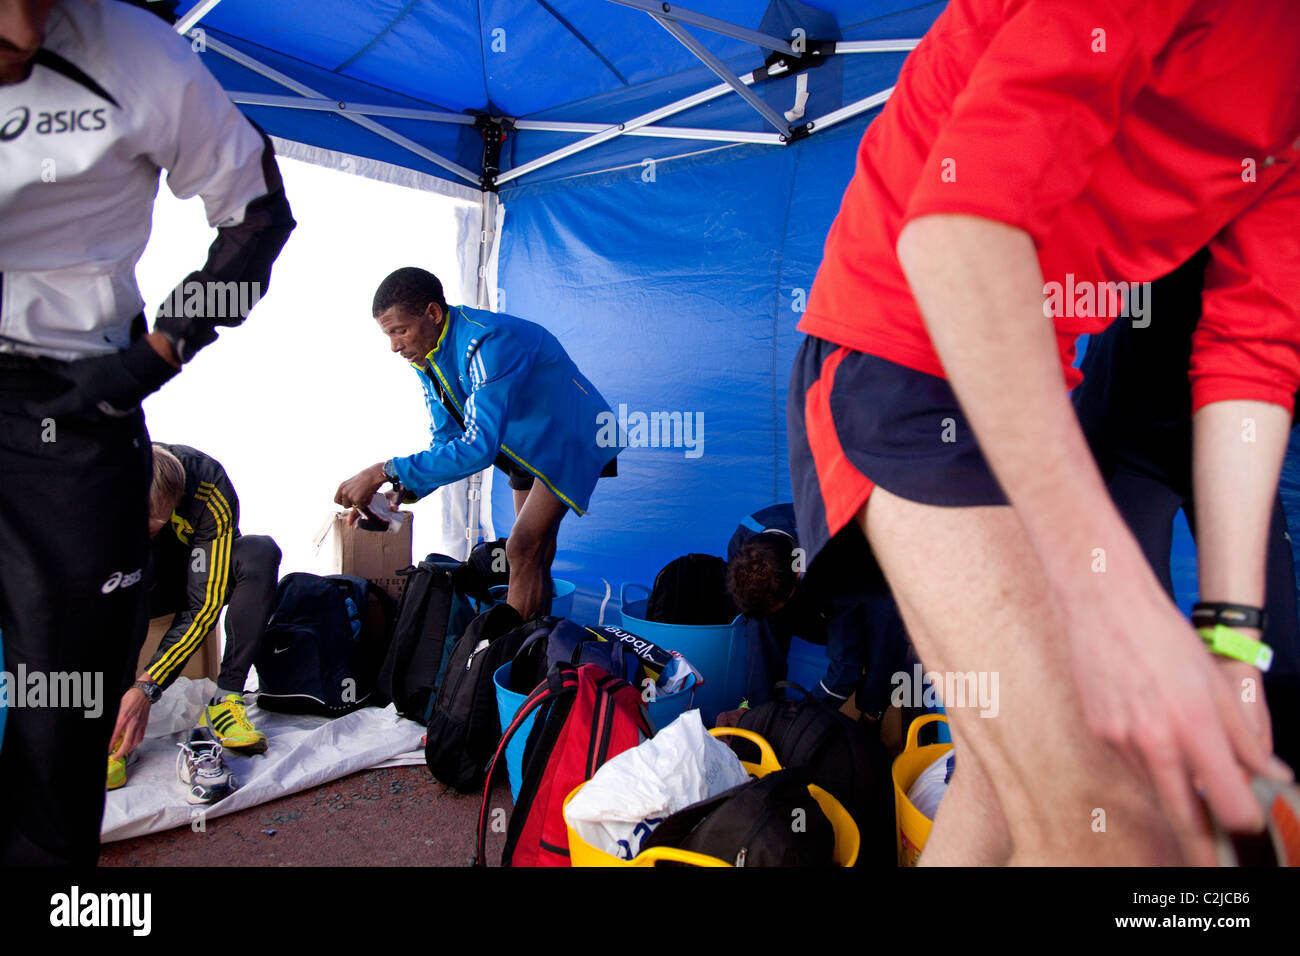 Haile Gebrselassie prepares for the Manchester 10k race 2010 in the elite athlete tent Stock Photo